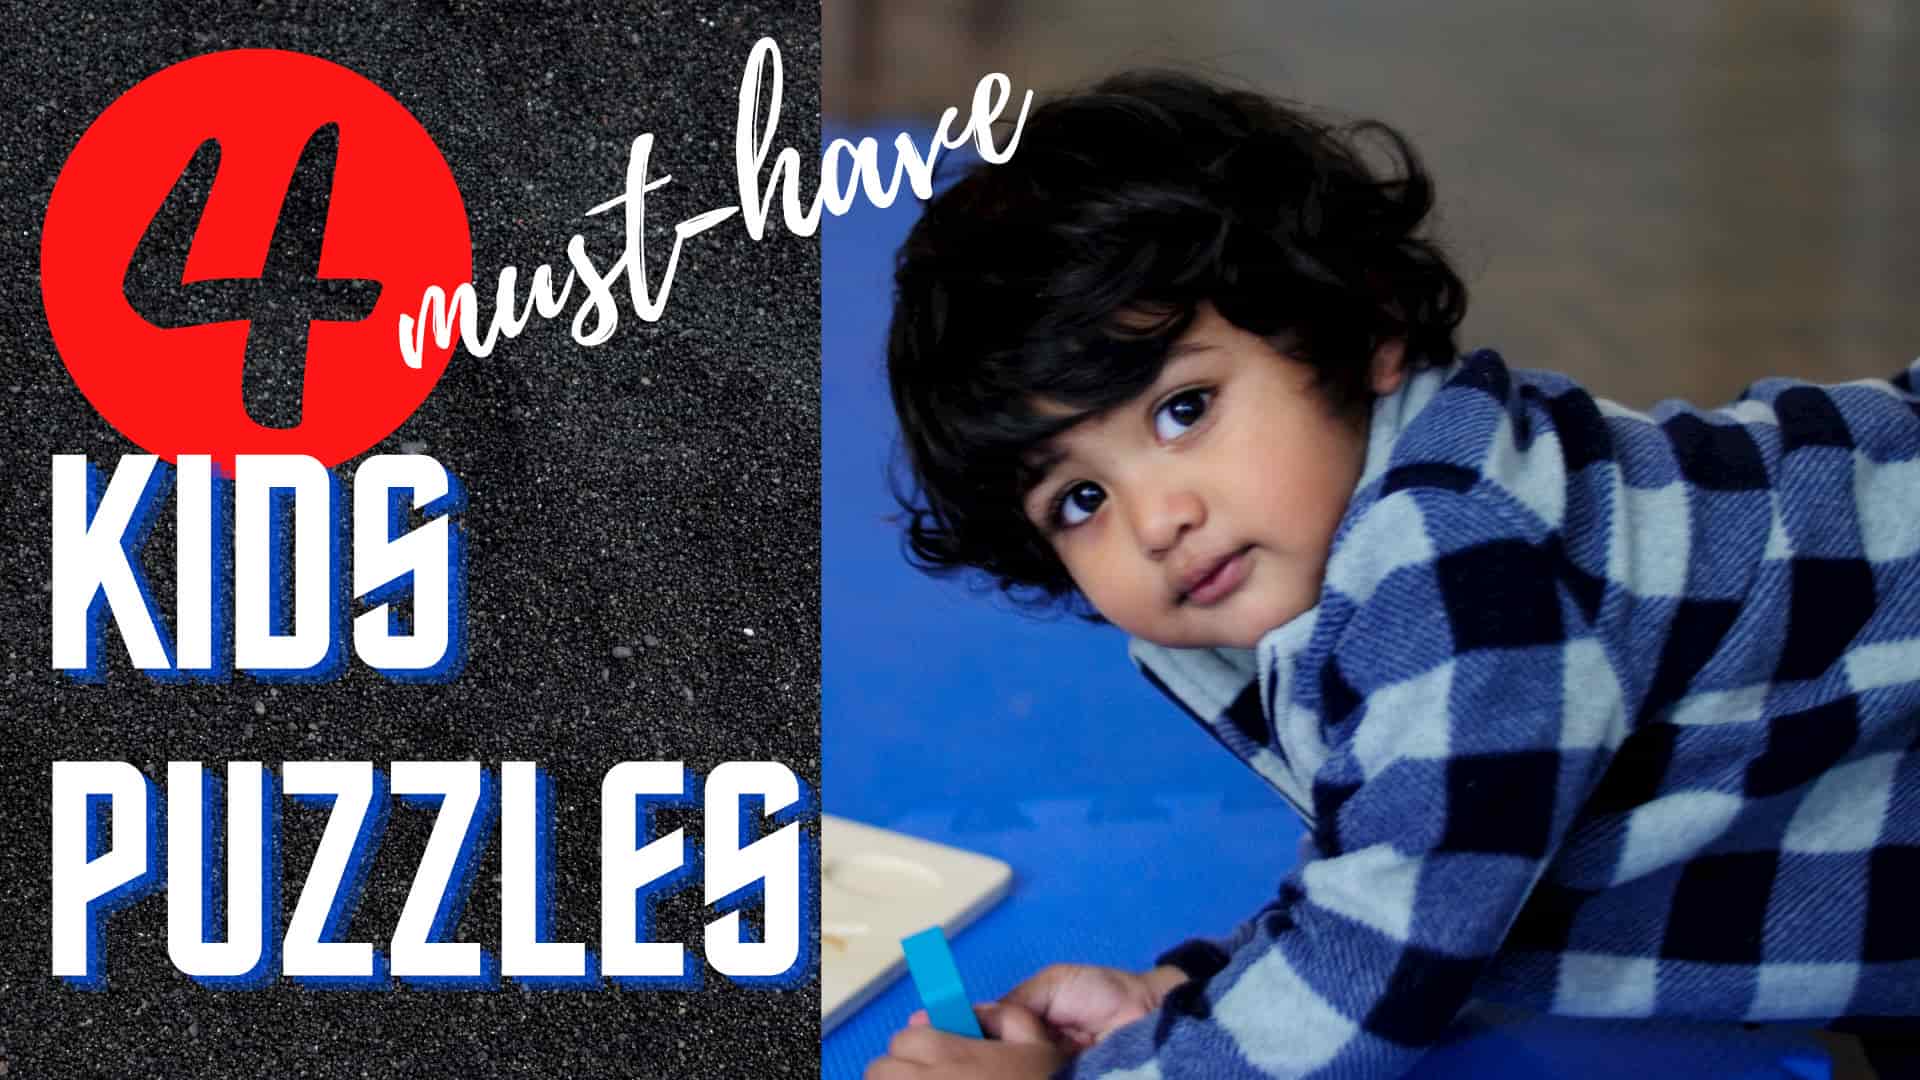 Puzzles that unlock kids' potential - My top 4 must-haves